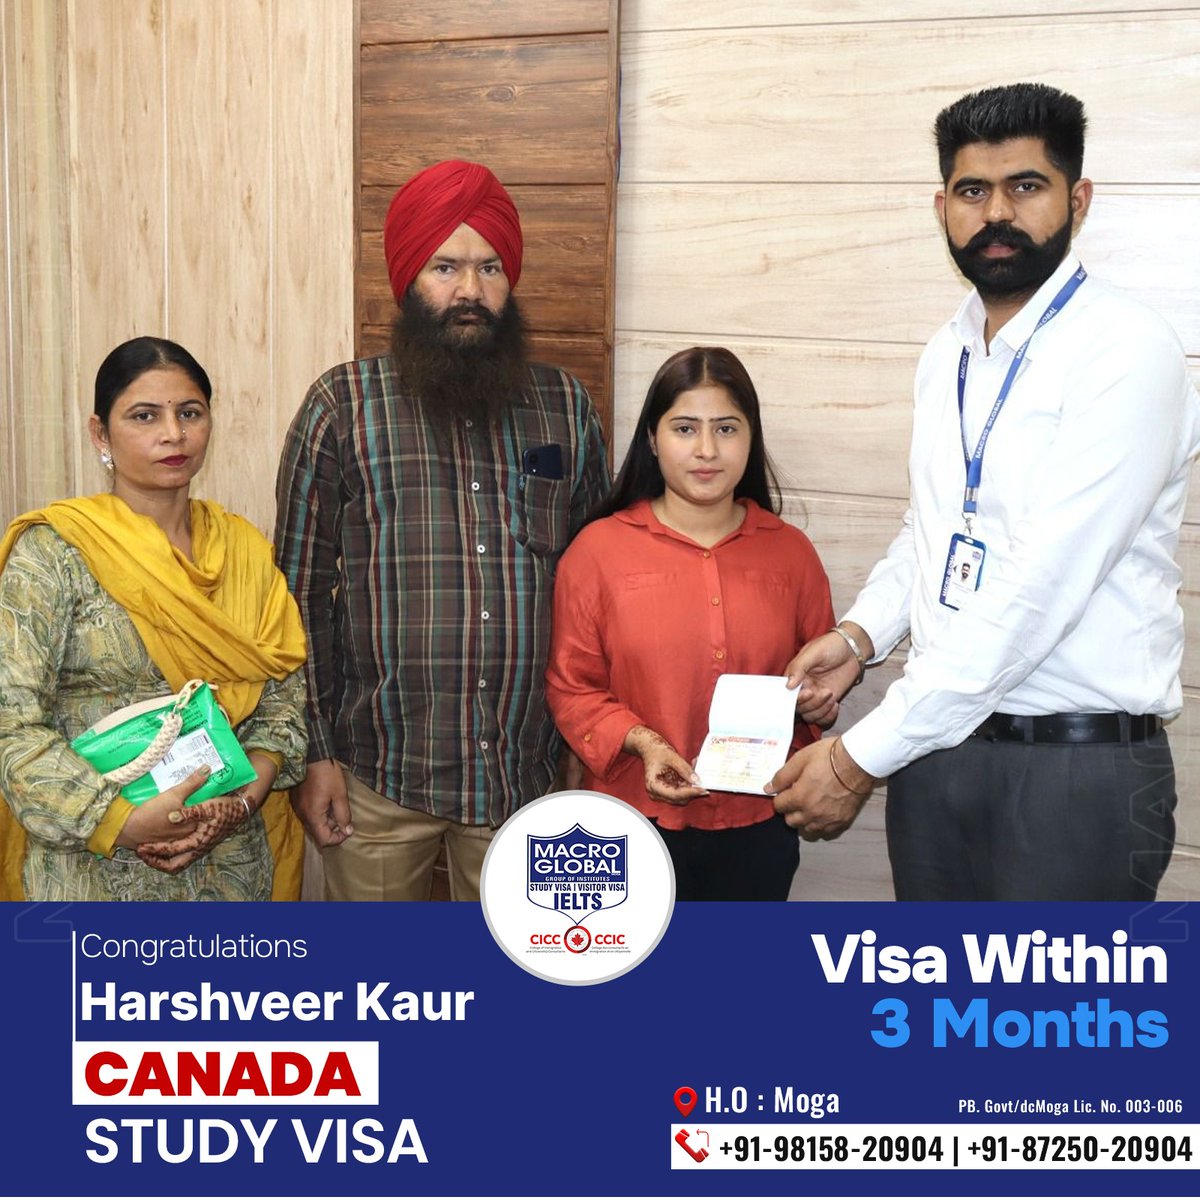 ✈️ Congratulations to Harshveer Kaur on her Canada Study Visa approval within 3 months guided by our expert team!

#MacroGlobal #GurmilapSinghDalla #Canada #Canadastudyvisa #canadaopenworkpermit #spousevisa #Visitorvisa #Visa #IELTS #IELTSTraining #EnrollNow #Immigration